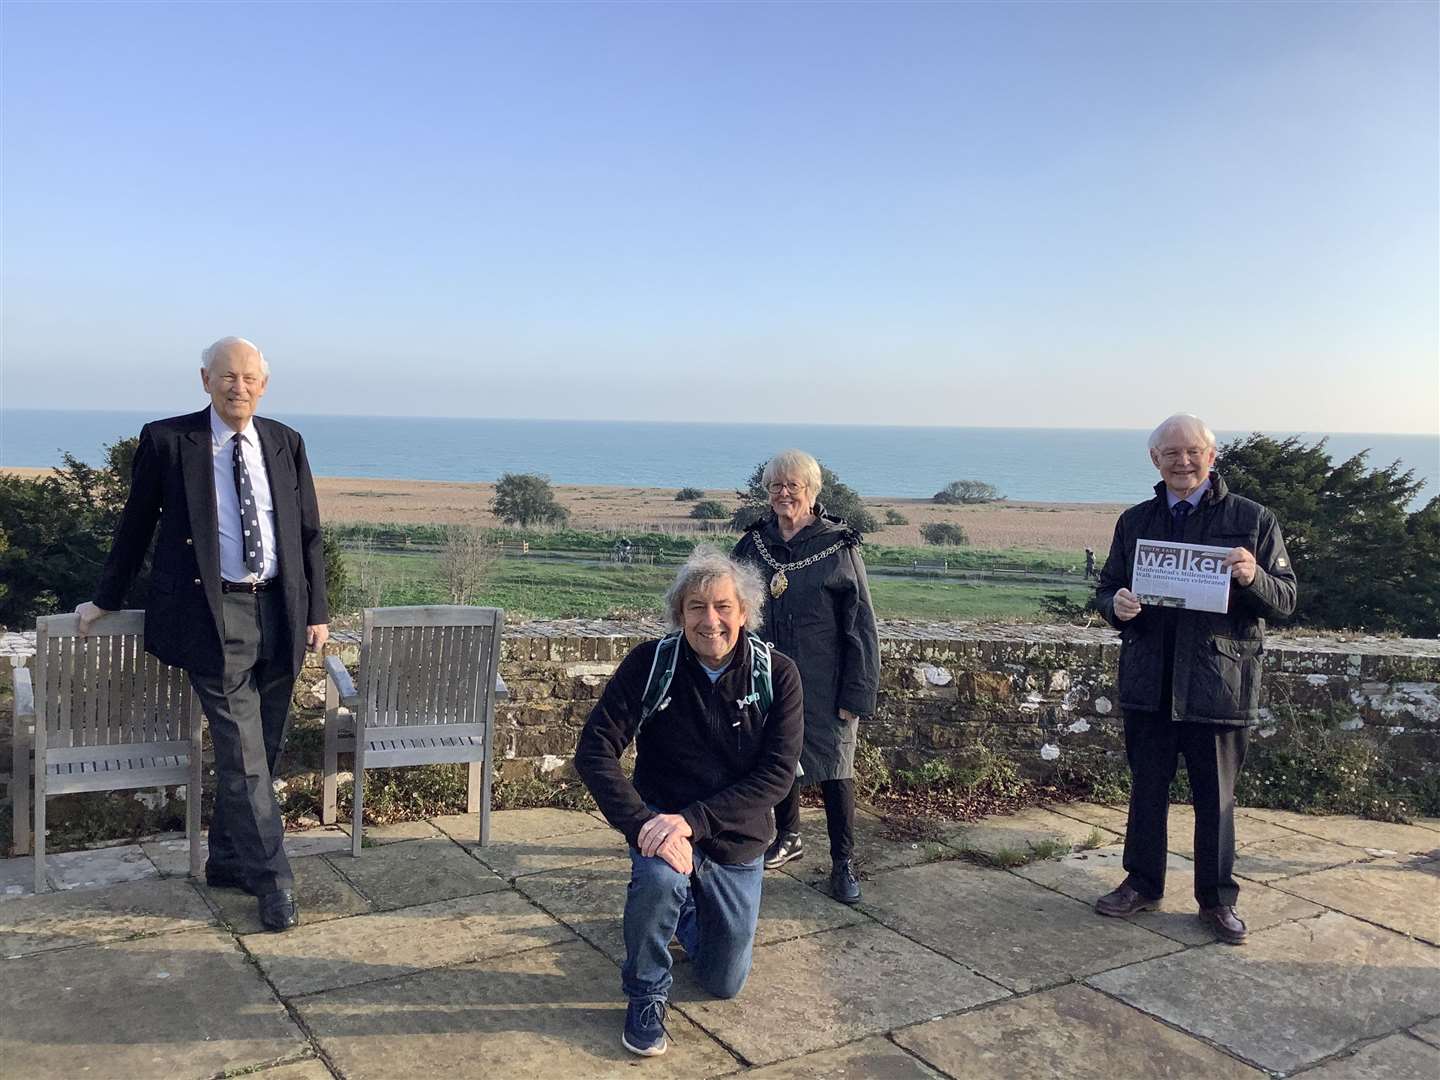 Bill Butler, who is leading the Walkers Are Welcome-Deal steering group, and Cllr Eileen Rowbotham, the Mayor of Deal with Admiral of the Fleet the Lord Boyce Lord Warden of the Cinque Ports who is supporting the bid pictured at Walmer Castle.